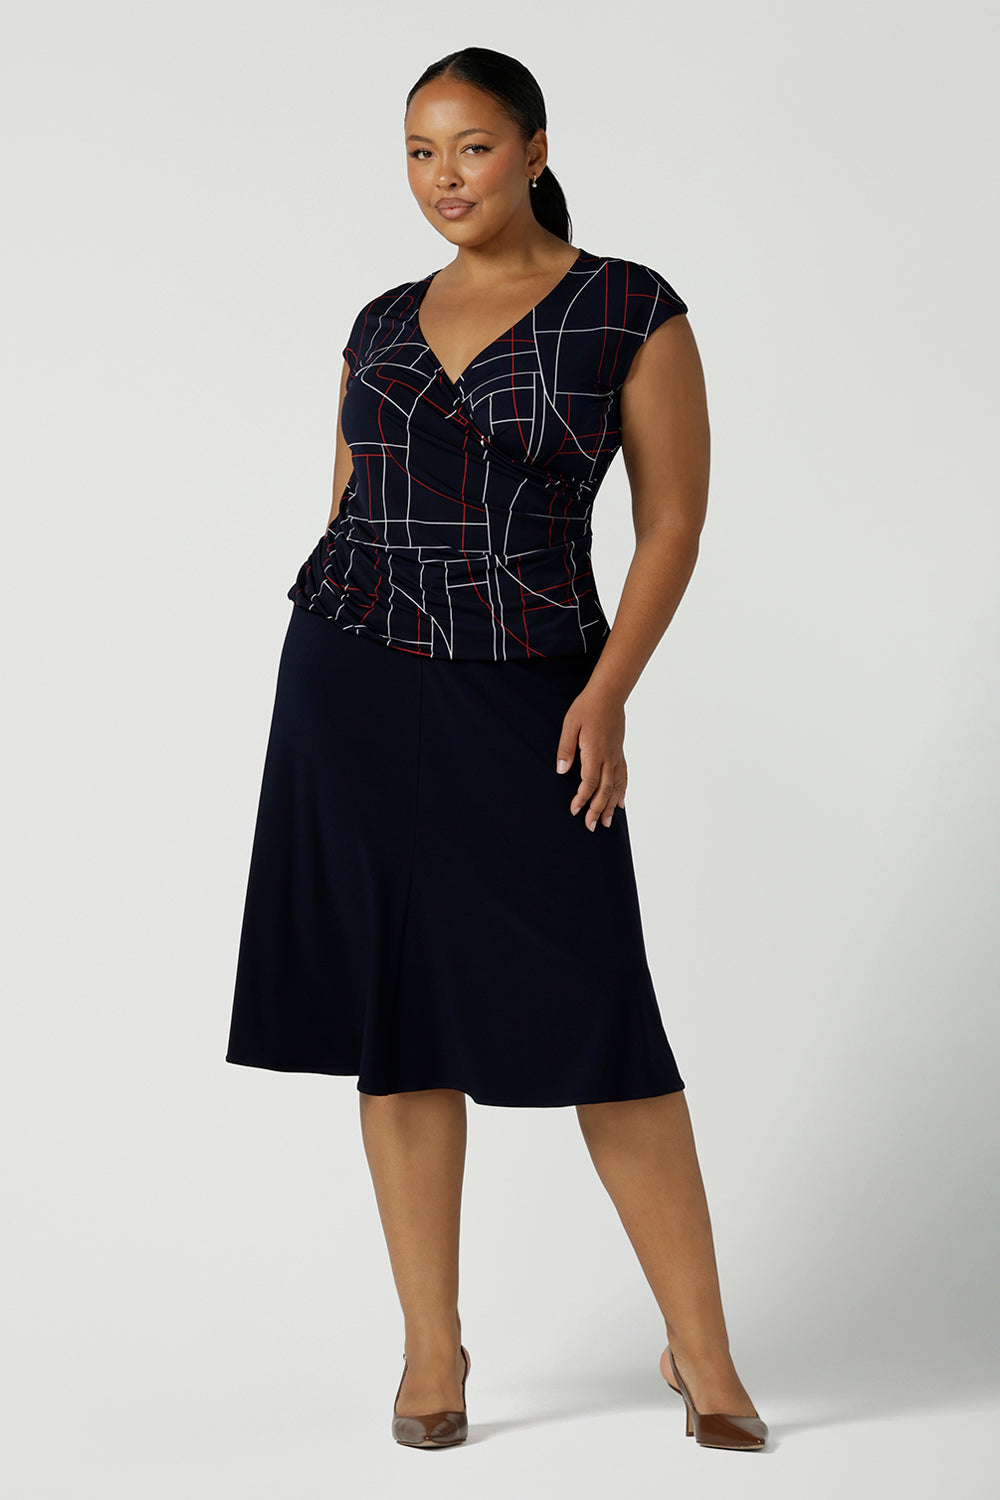 Size 16 woman wears a Finley Top in Navy abstract. Fixed wrap top with a geometric pattern. Styled back with a Navy skirt. Comfortable corporate wear for women. Made in Australia for women size 8 - 24. 